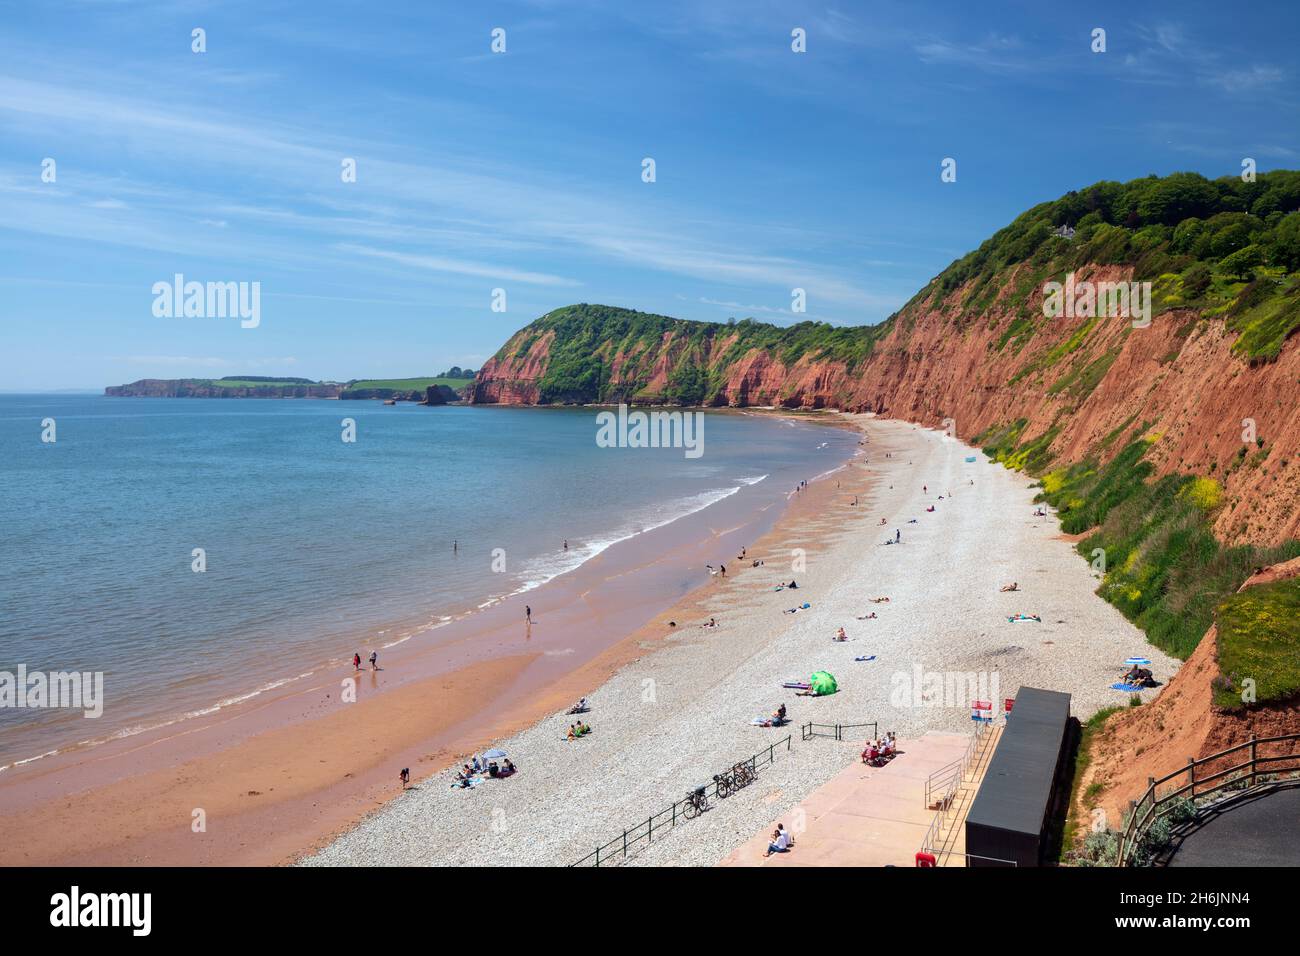 Jacob's Ladder, Sidmouth beach viewed from Connaught Gardens, Sidmouth, Jurassic Coast, UNESCO World Heritage Site, Devon, England, United Kingdom Stock Photo